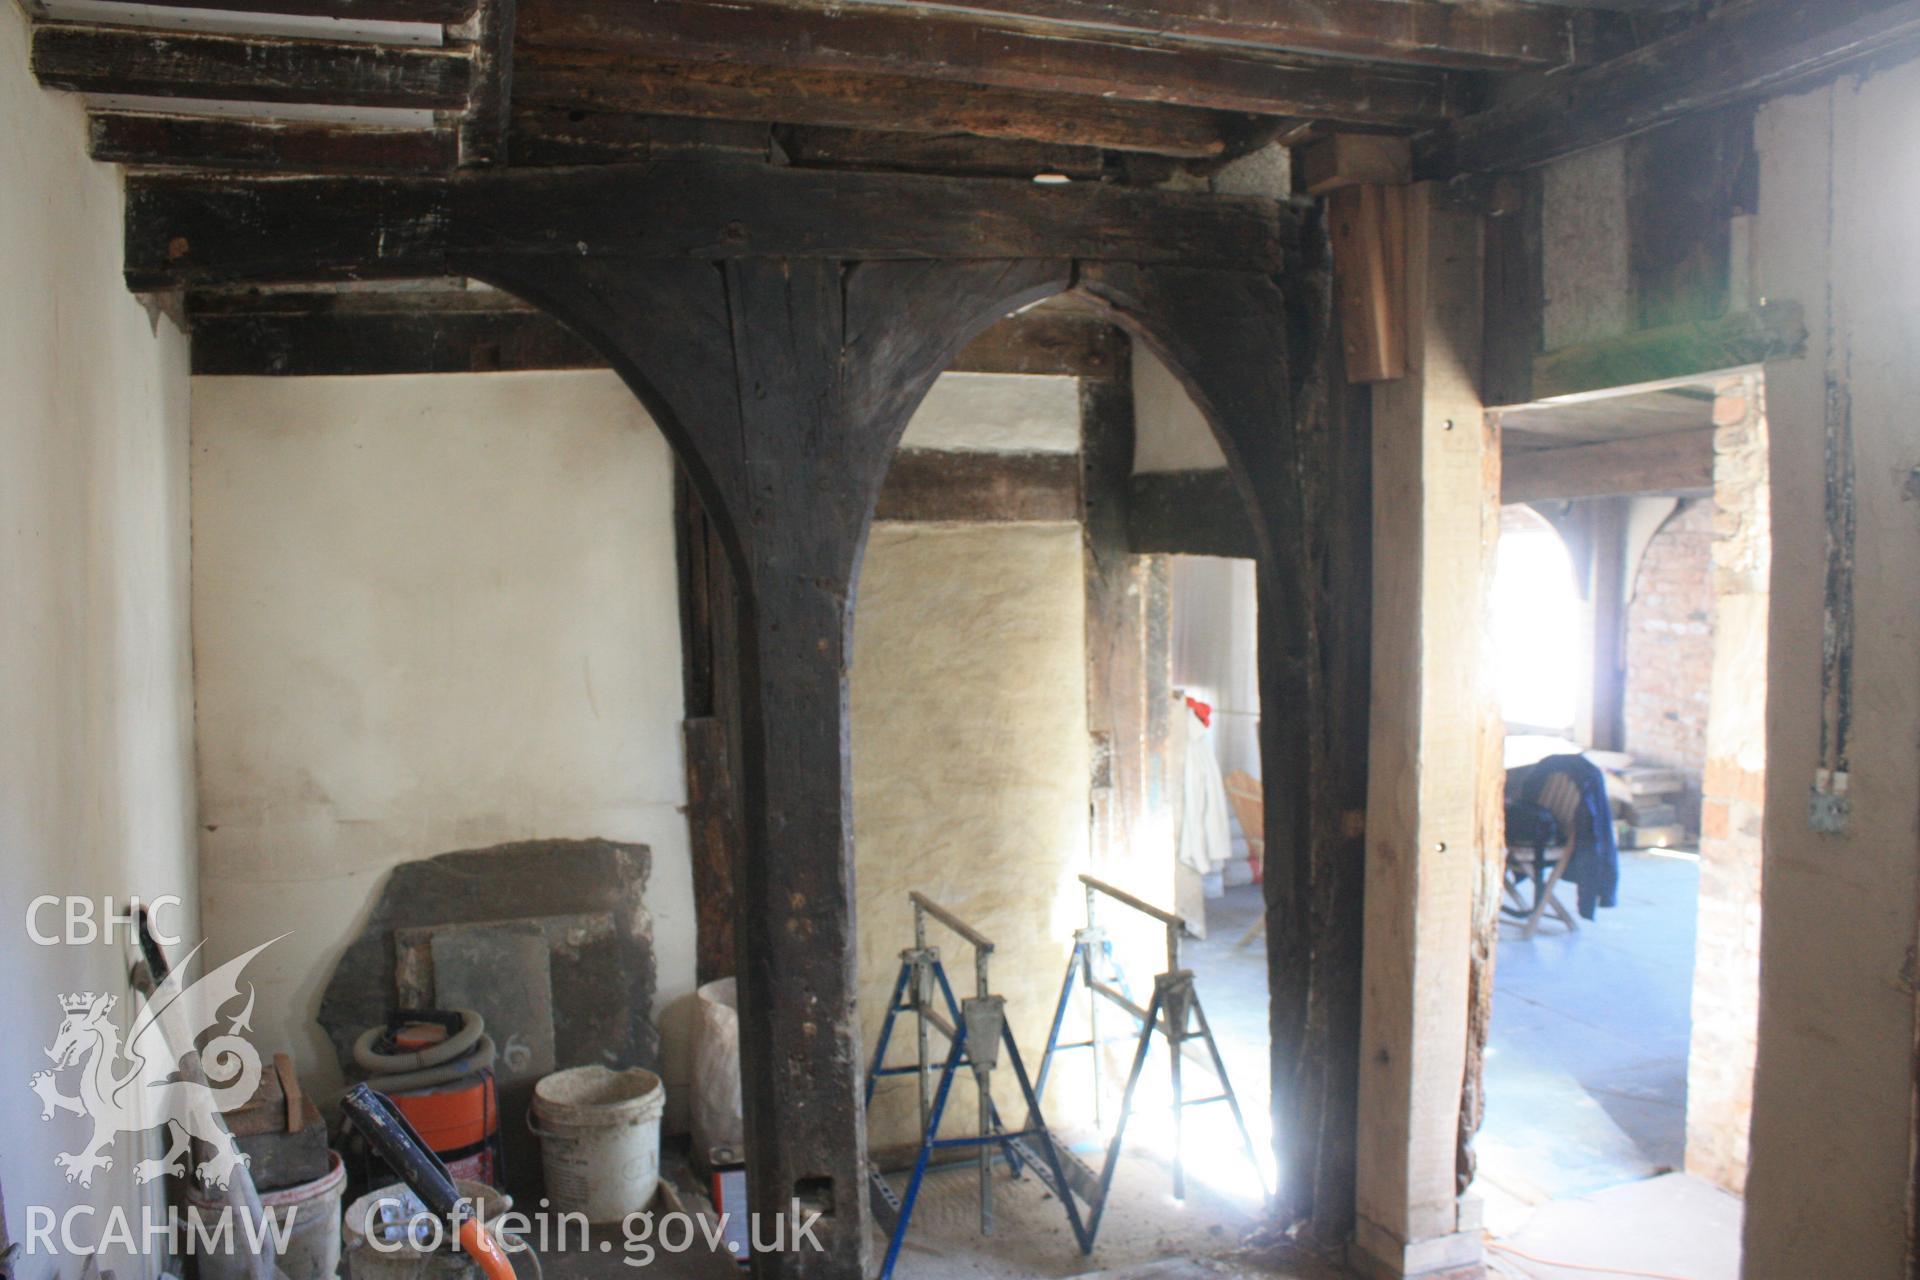 Colour photograph of interior 15th century two centred arched doorway at Porth-y-Dwr, 67 Clwyd Street, Ruthin. Photographed during survey conducted by Geoff Ward on 10th June 2013.